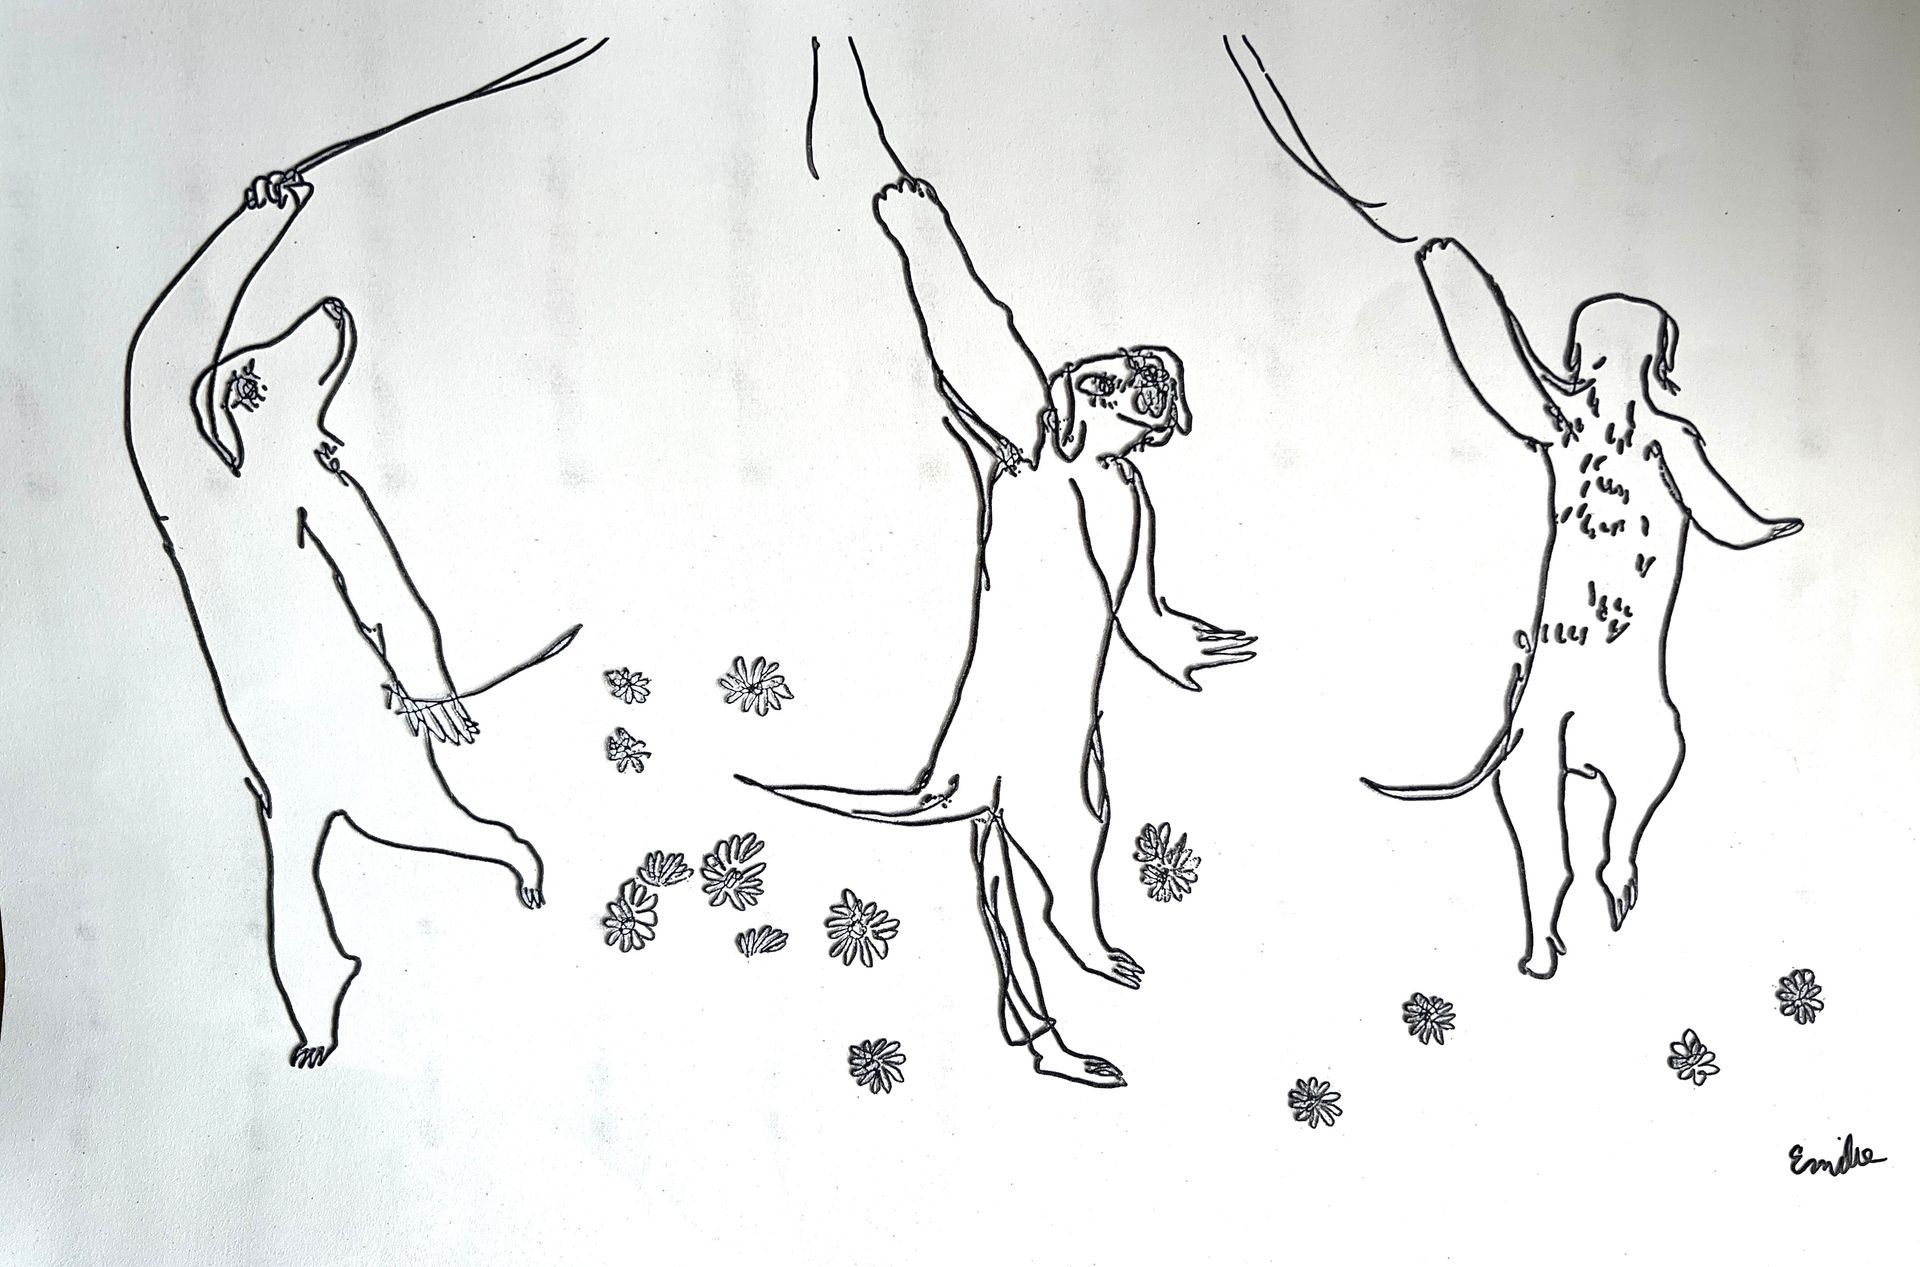 A black & white photo of three dogs with their paws reaching upward to grab onto strings.  In between the dogs are flowers. The name Emilie is scribed at the bottom right of this photo. This is a partial sketch/depiction of Emilie's exhibit.